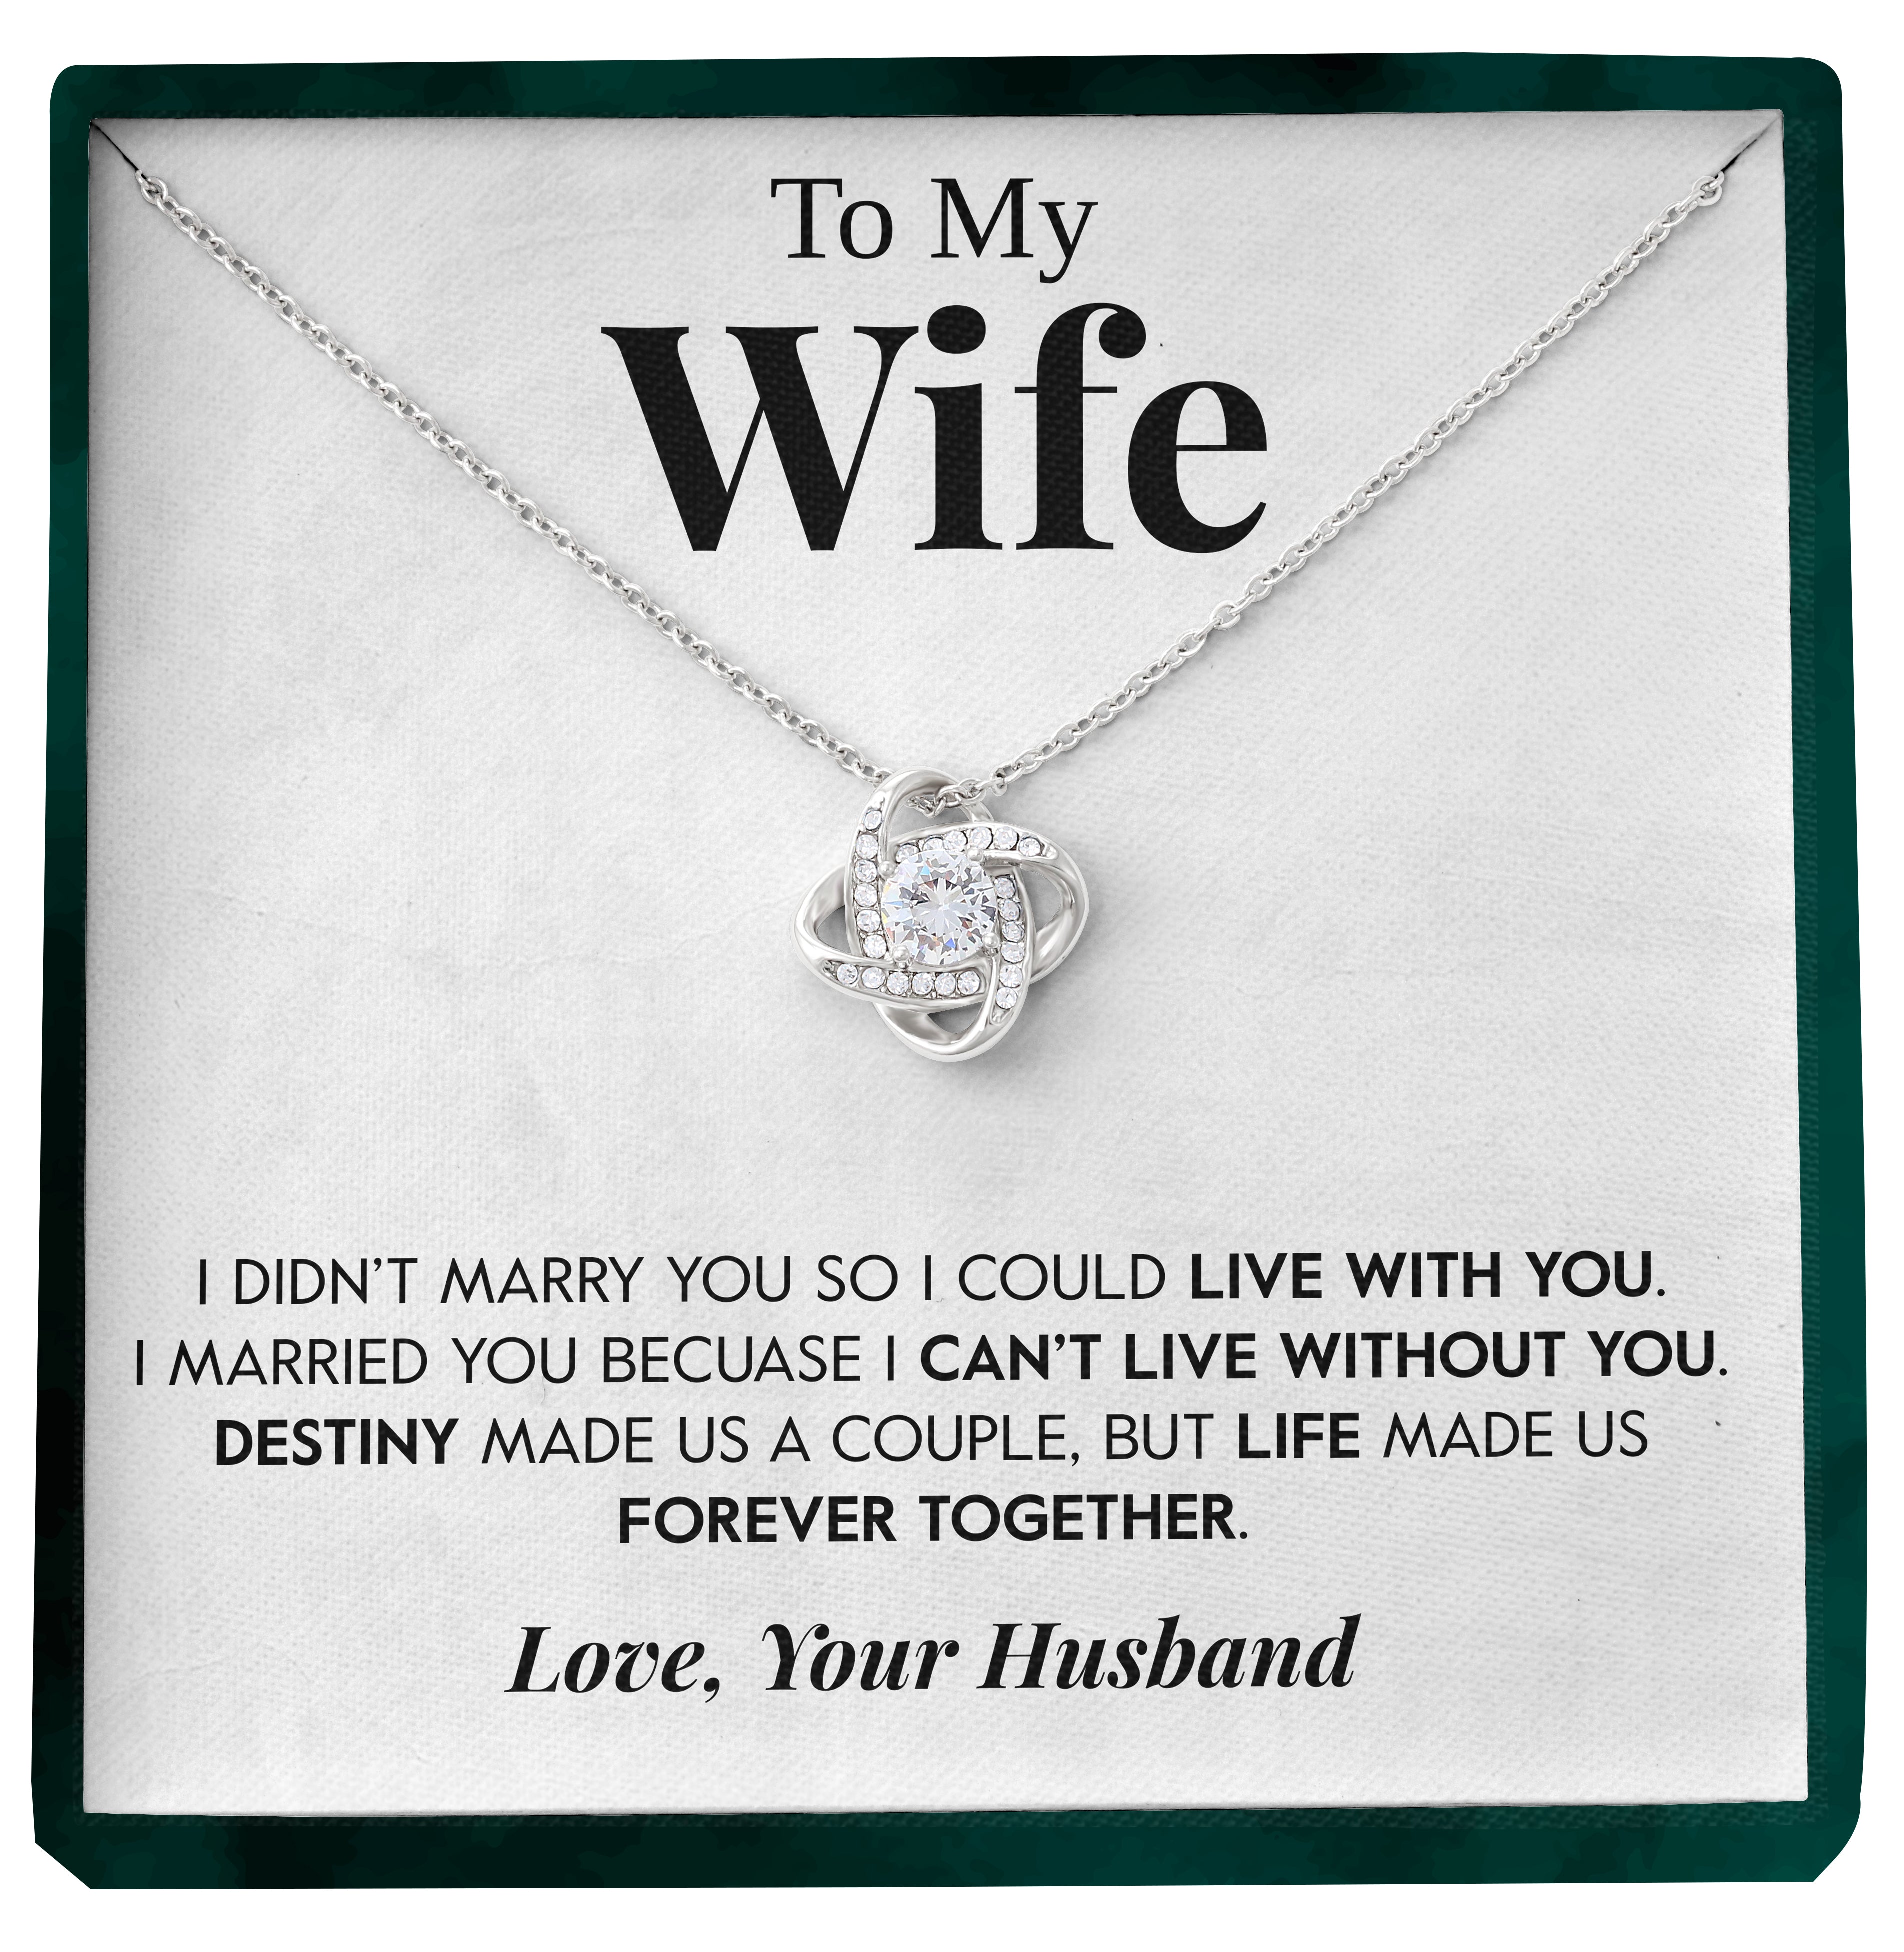 To My Wife | "Forever Together" | Love Knot Necklace